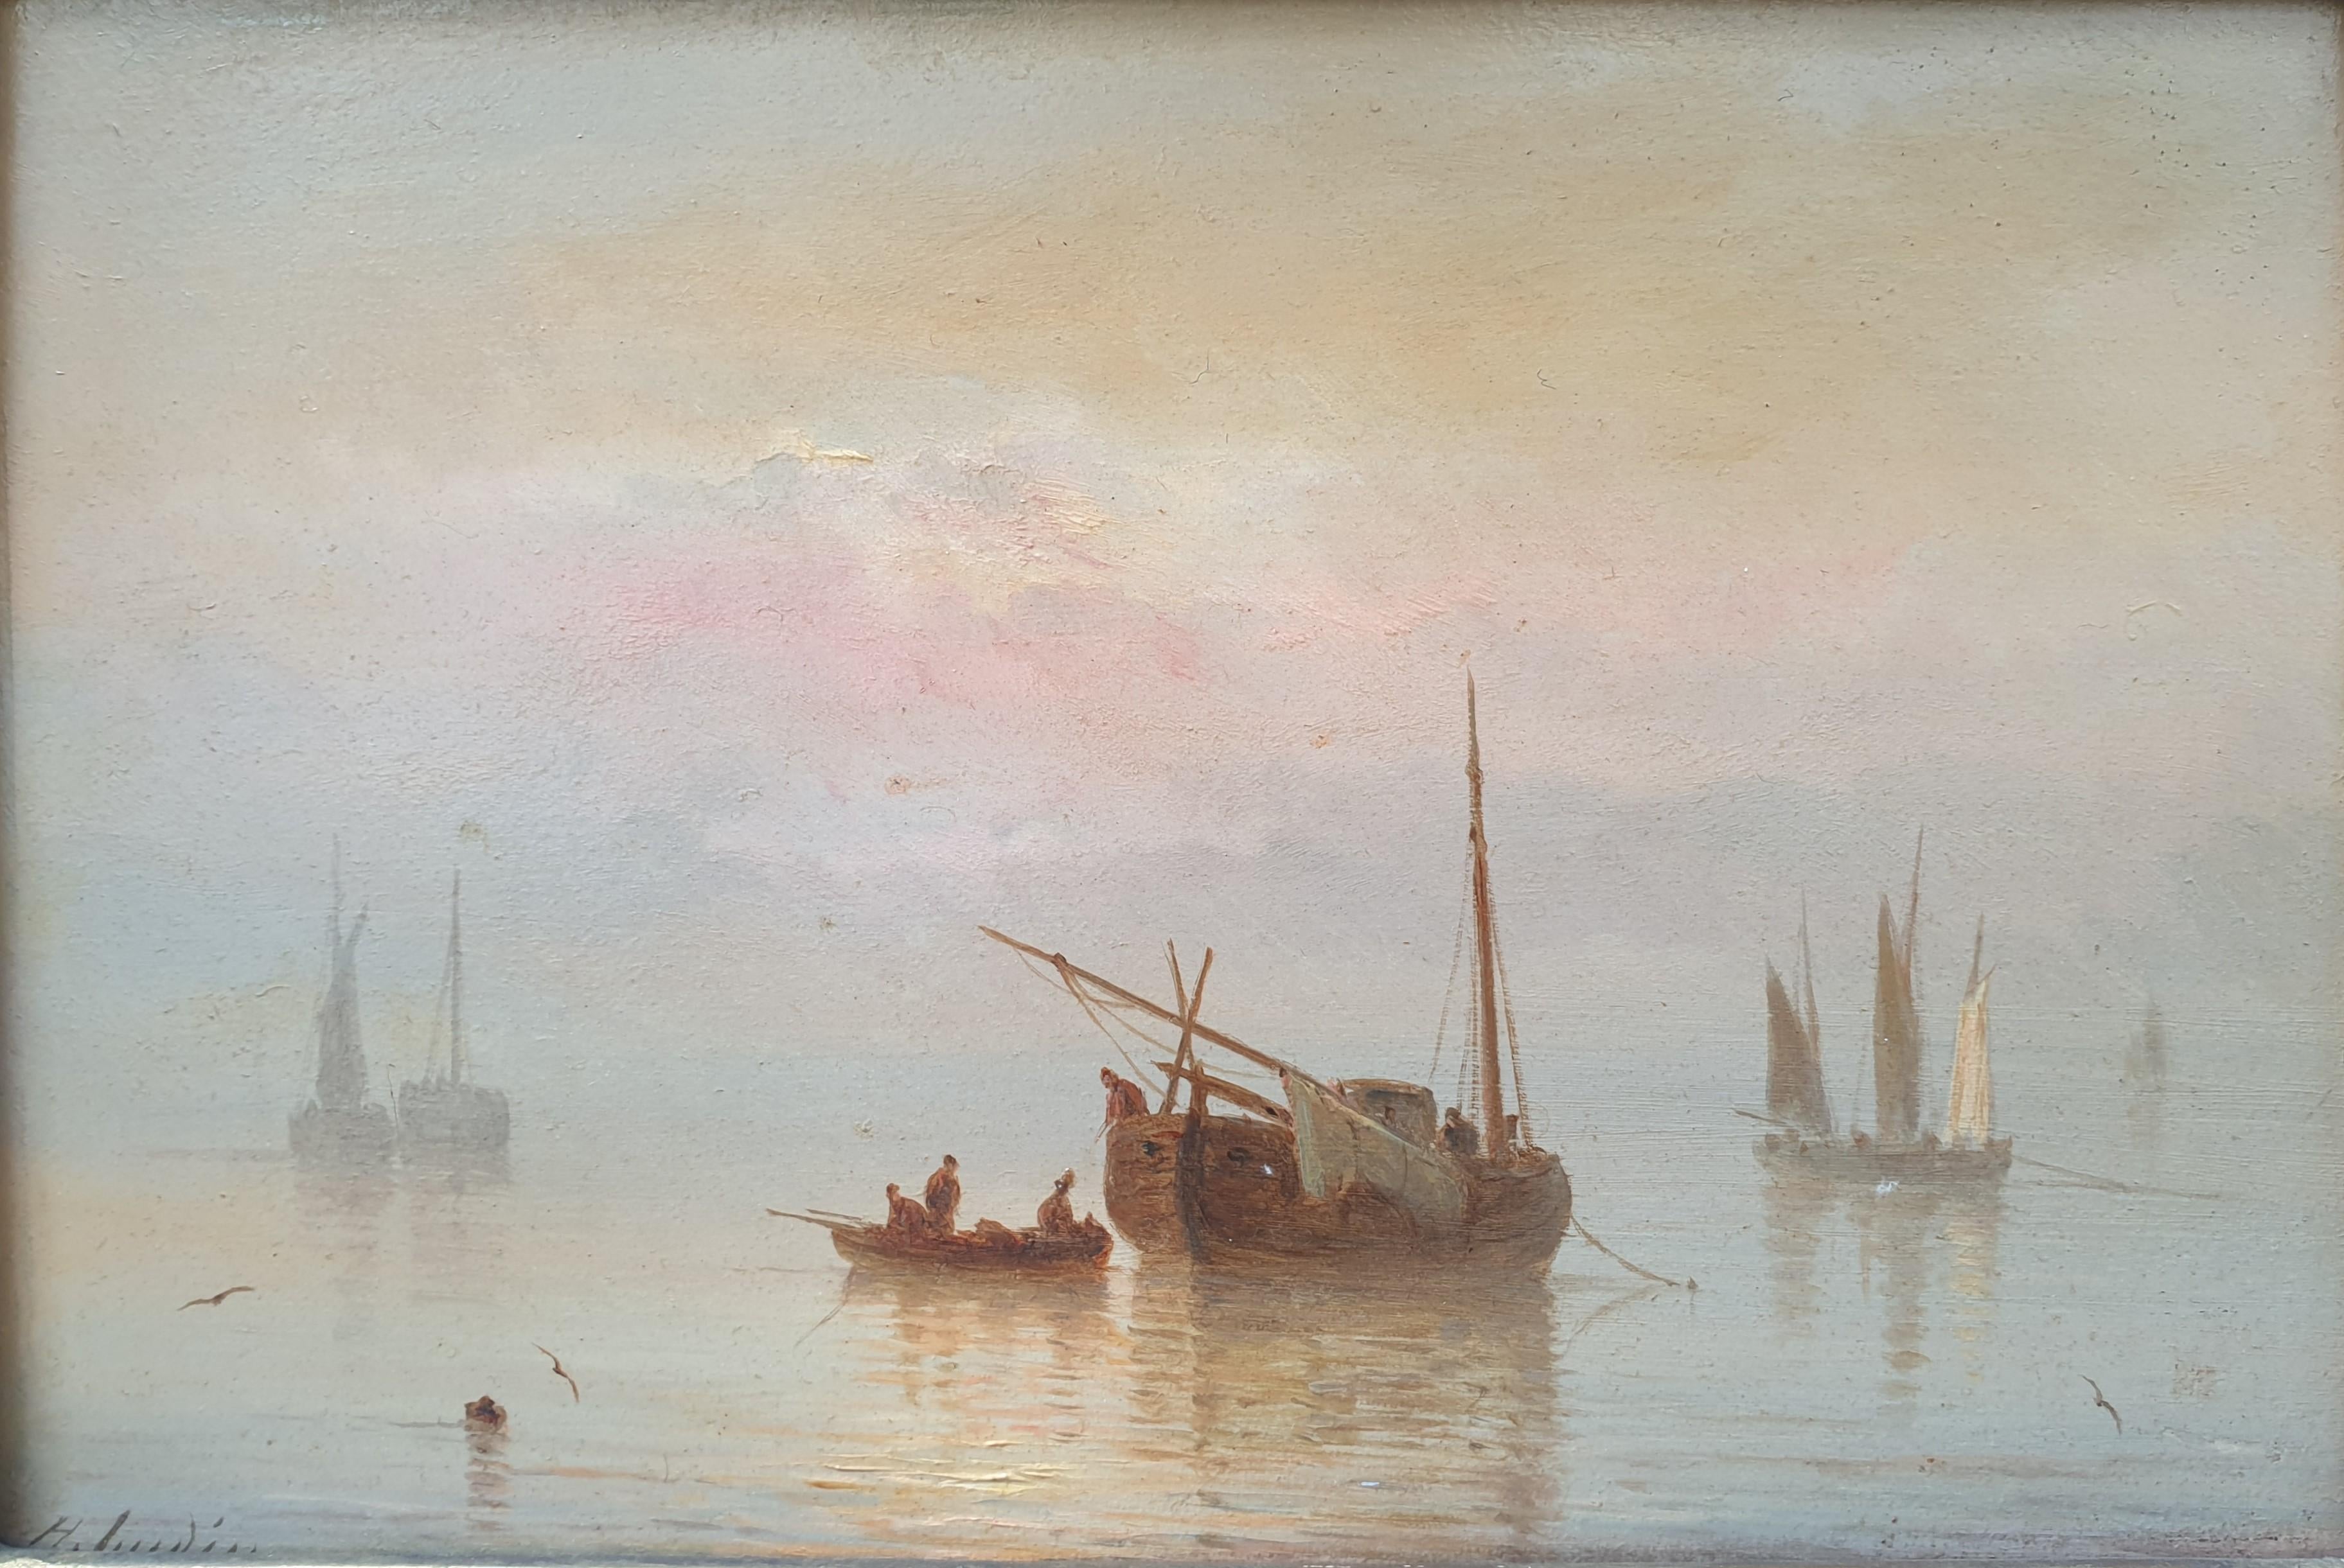 GUDIN Henriette Marine sunset boats sea romantic french 19th small panel  - Painting by Henriette Gudin